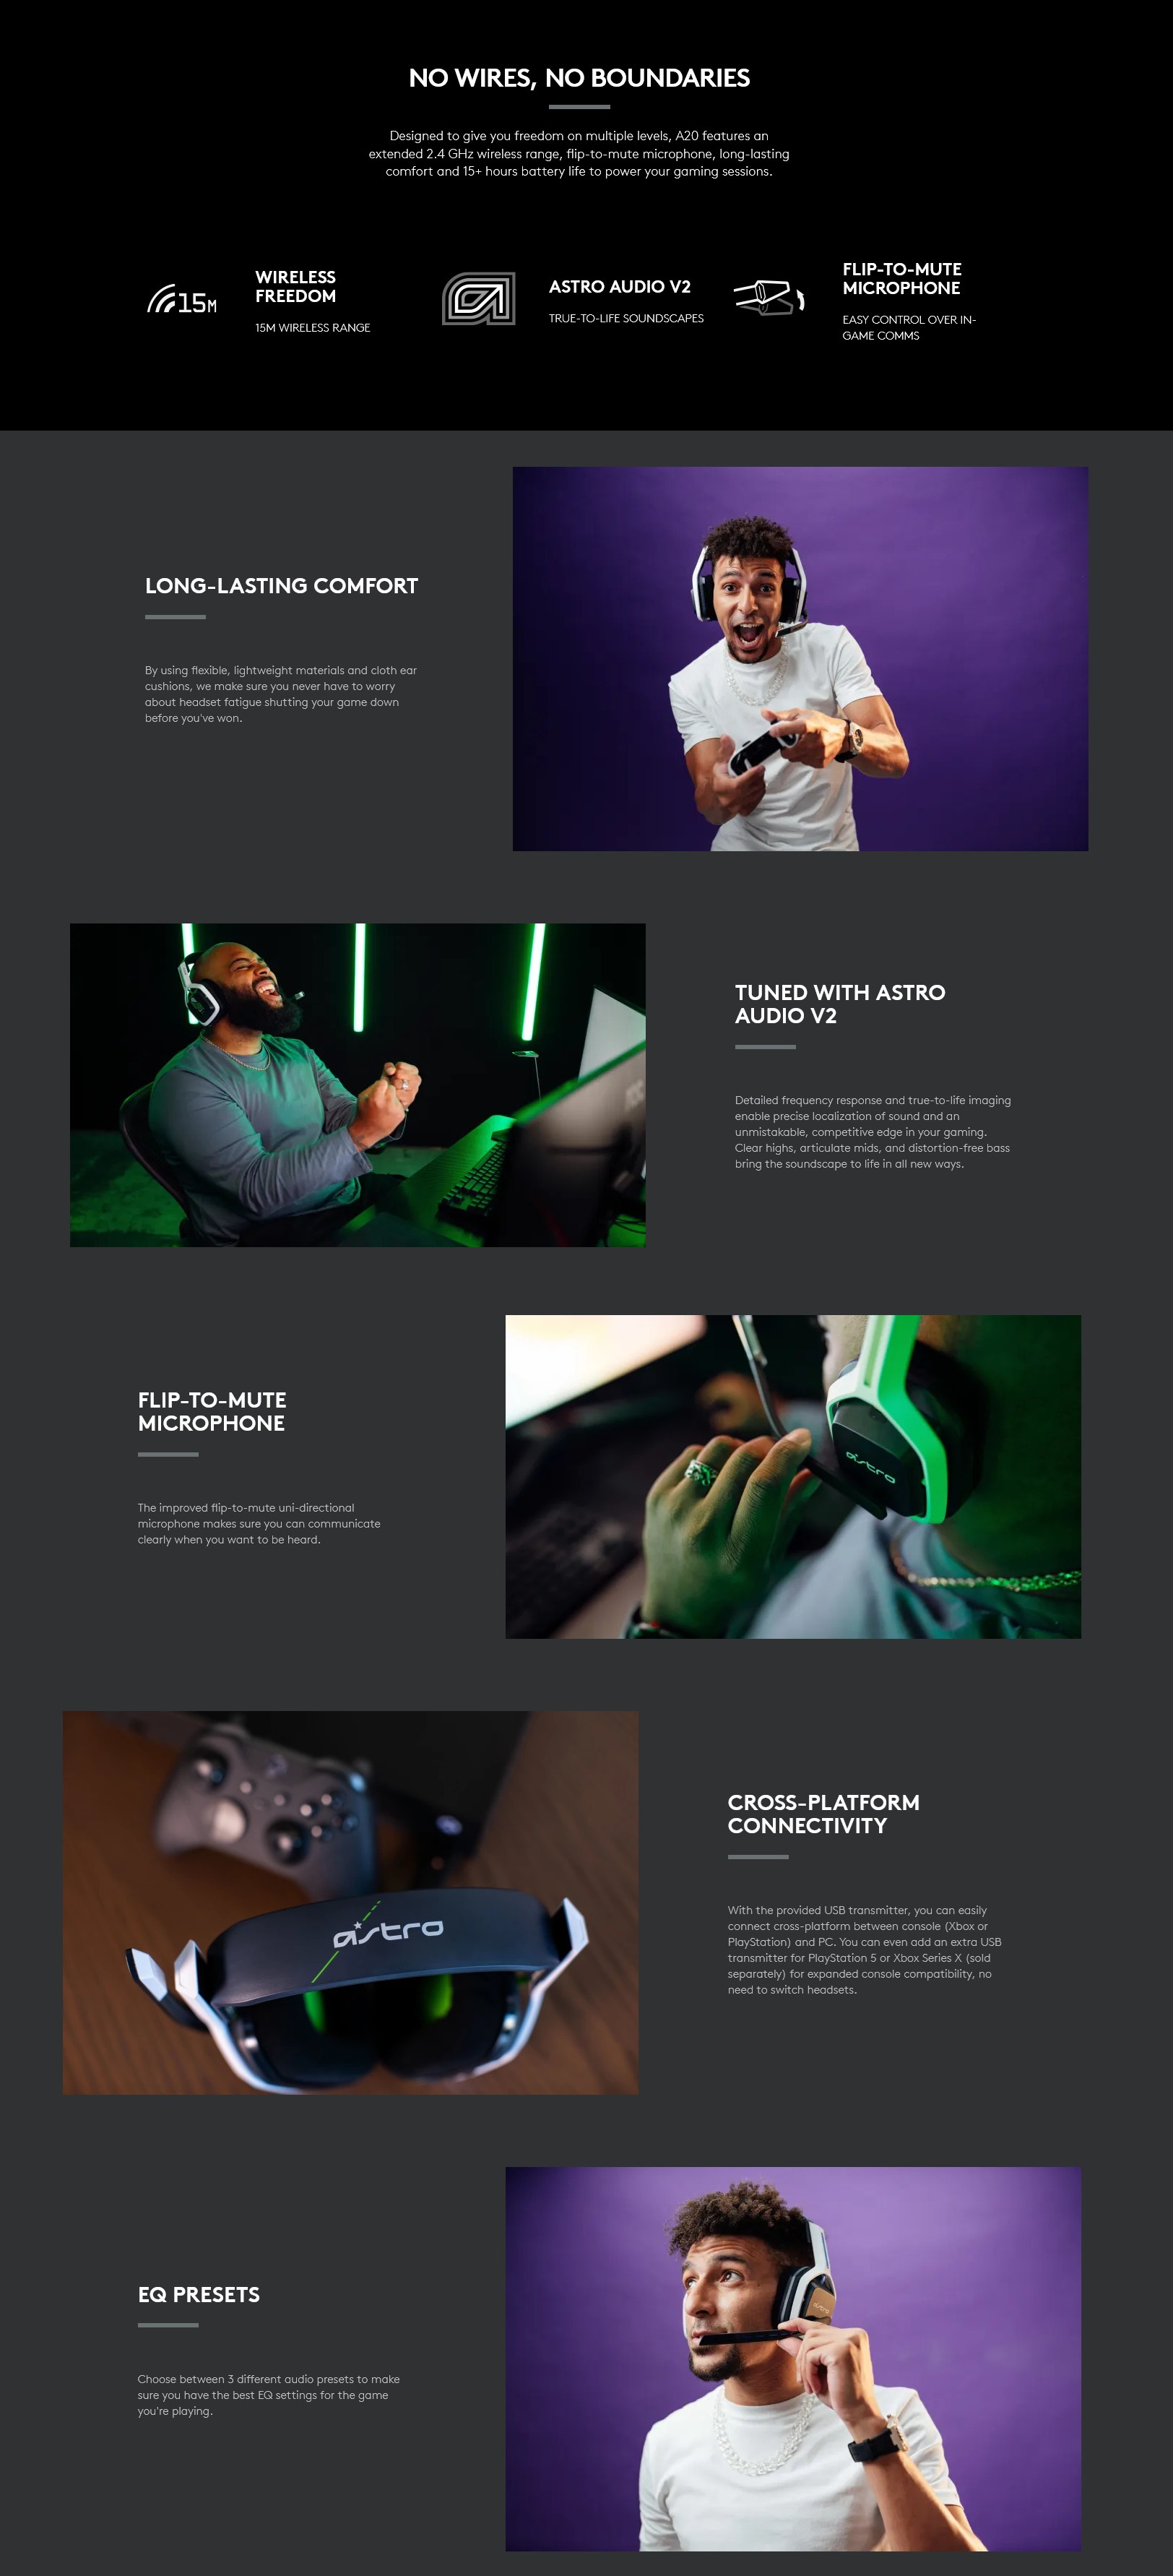 A large marketing image providing additional information about the product ASTRO A20 Gen 2 - Wireless Headset for Xbox & PC - Additional alt info not provided